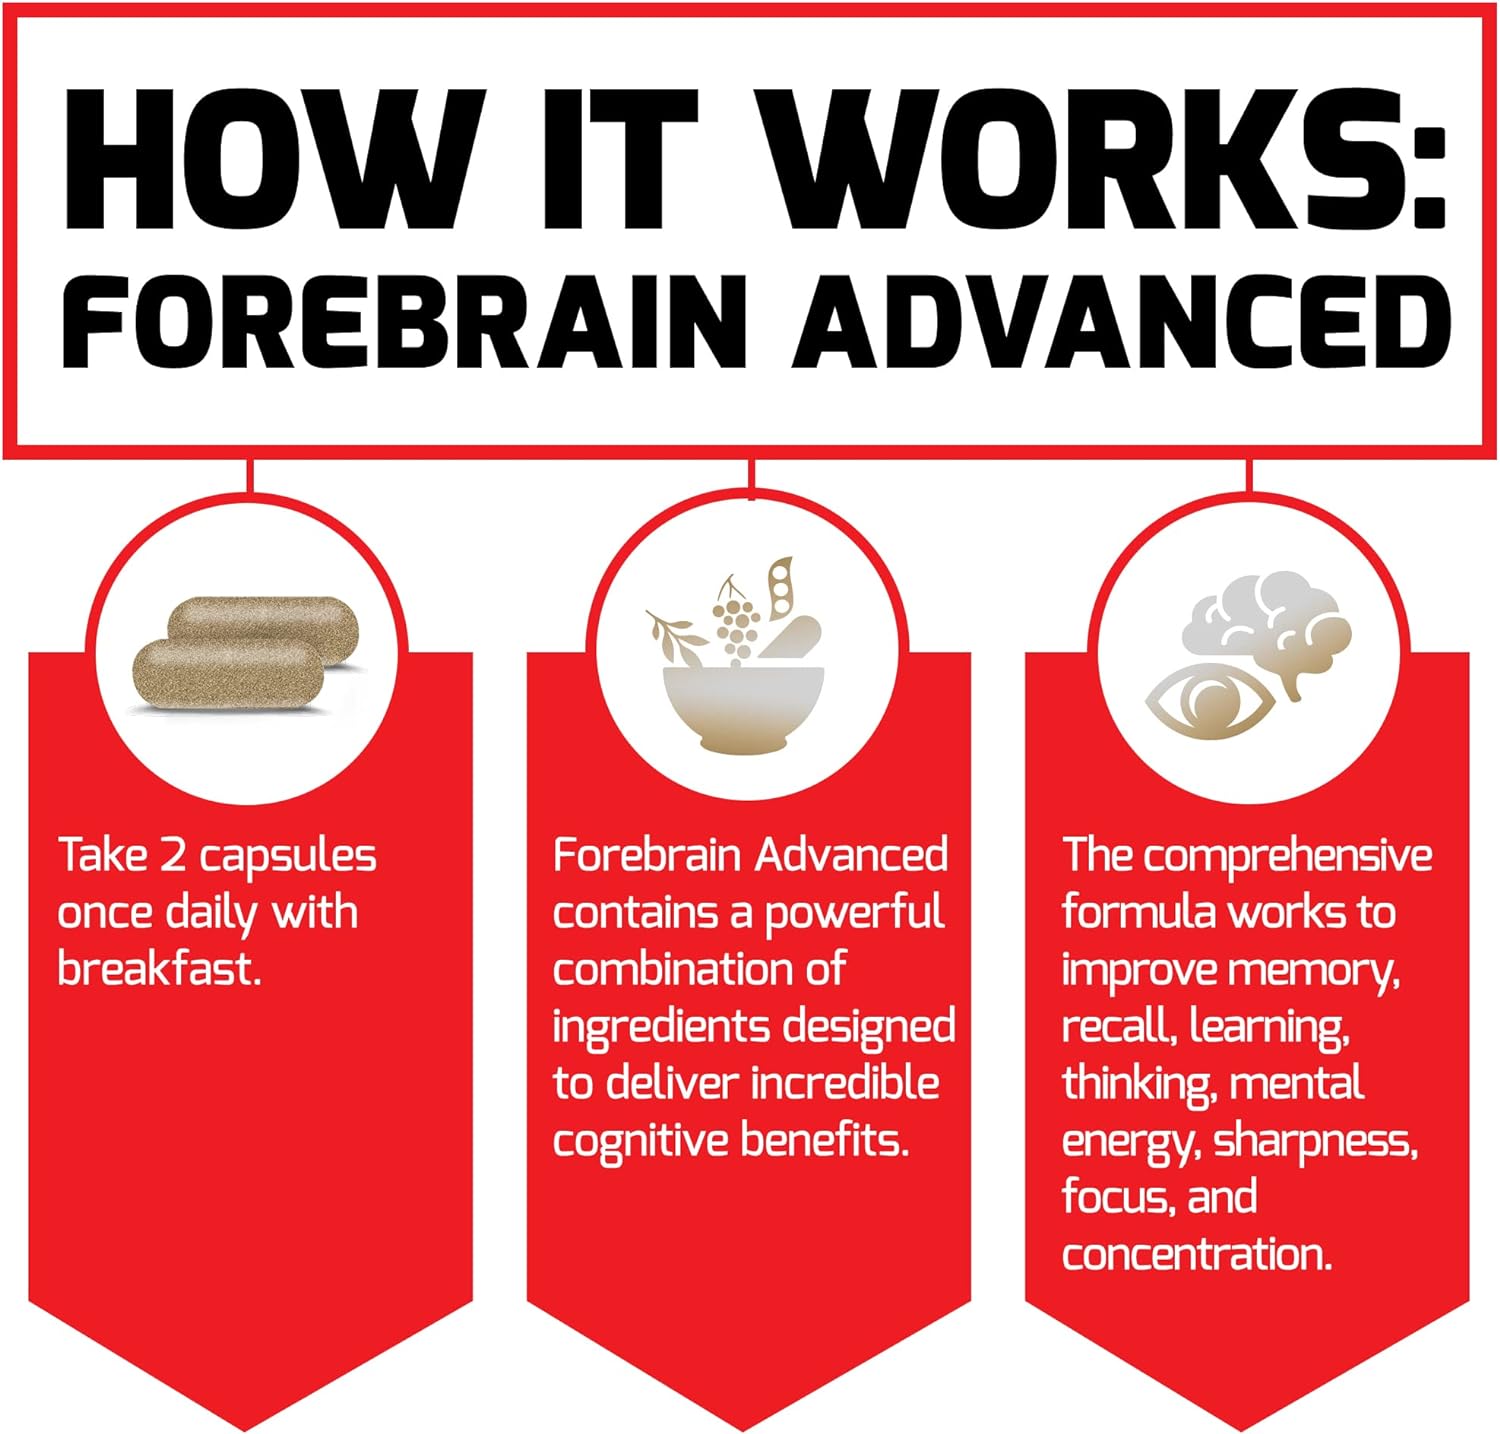 FORCE FACTOR Forebrain Advanced, 2-Pack, Brain Booster, Brain Supplement for Memory Support, Concentration, Focus, Thinking, and Mental Energy, Powerful Ingredients That Work Fast, 120 Capsules